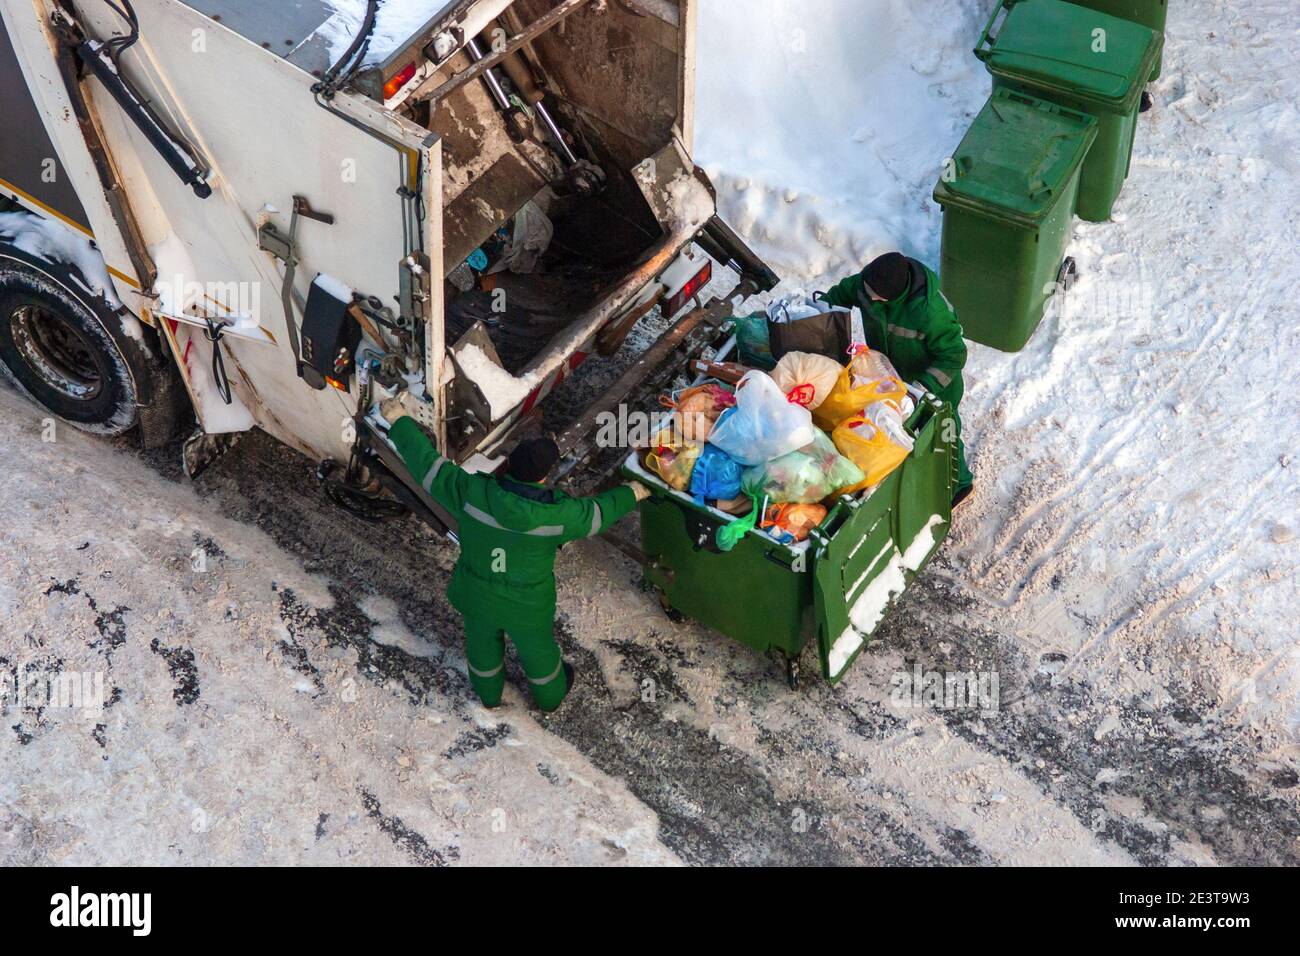 garbage collection workers pick up household waste in winter Stock Photo